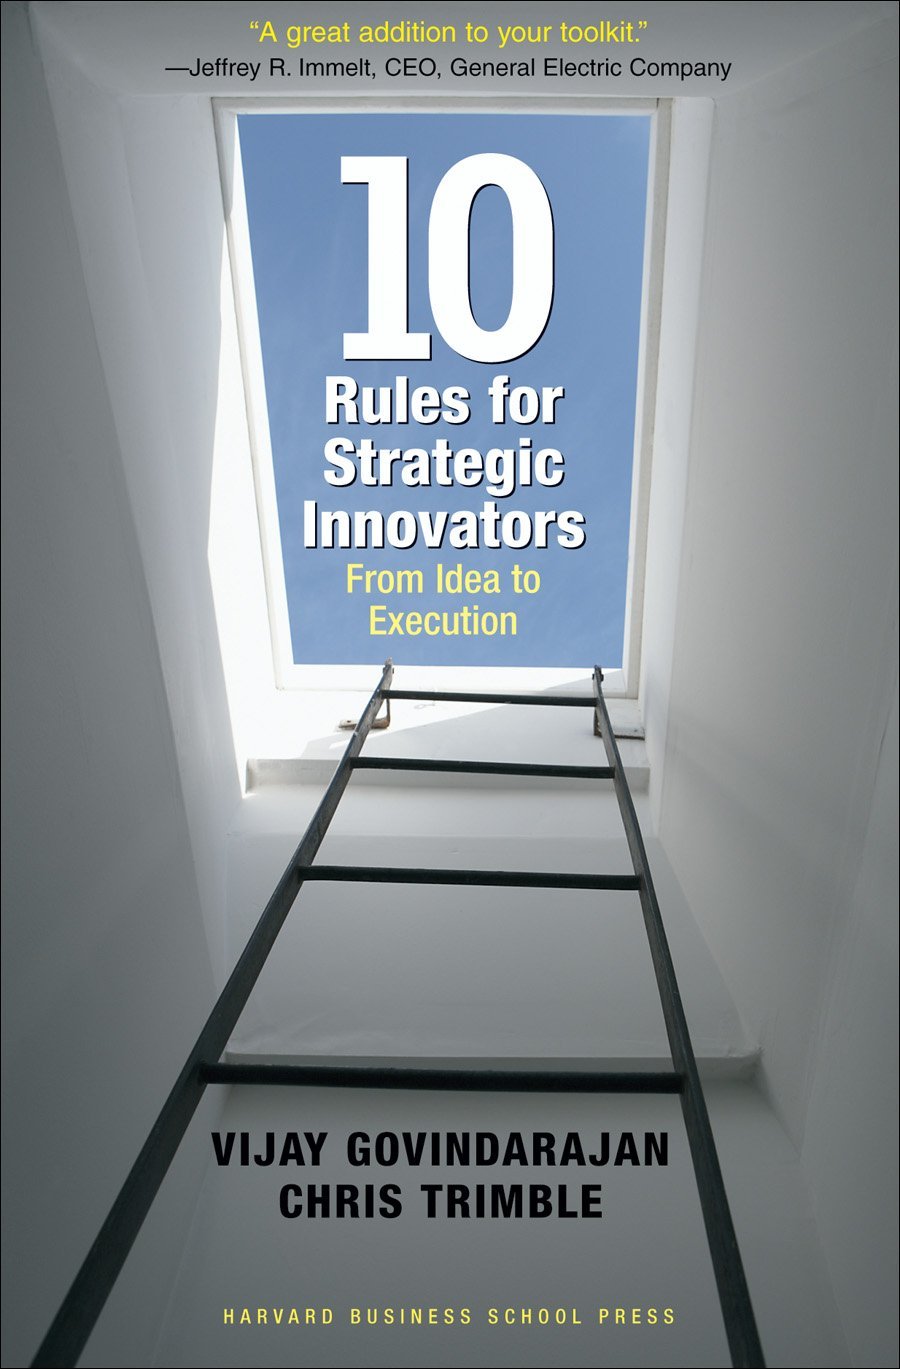 Ten Rules for Strategic Innovators: From Idea to Execution Book by Chris Trimble and Vijay Govindarajan